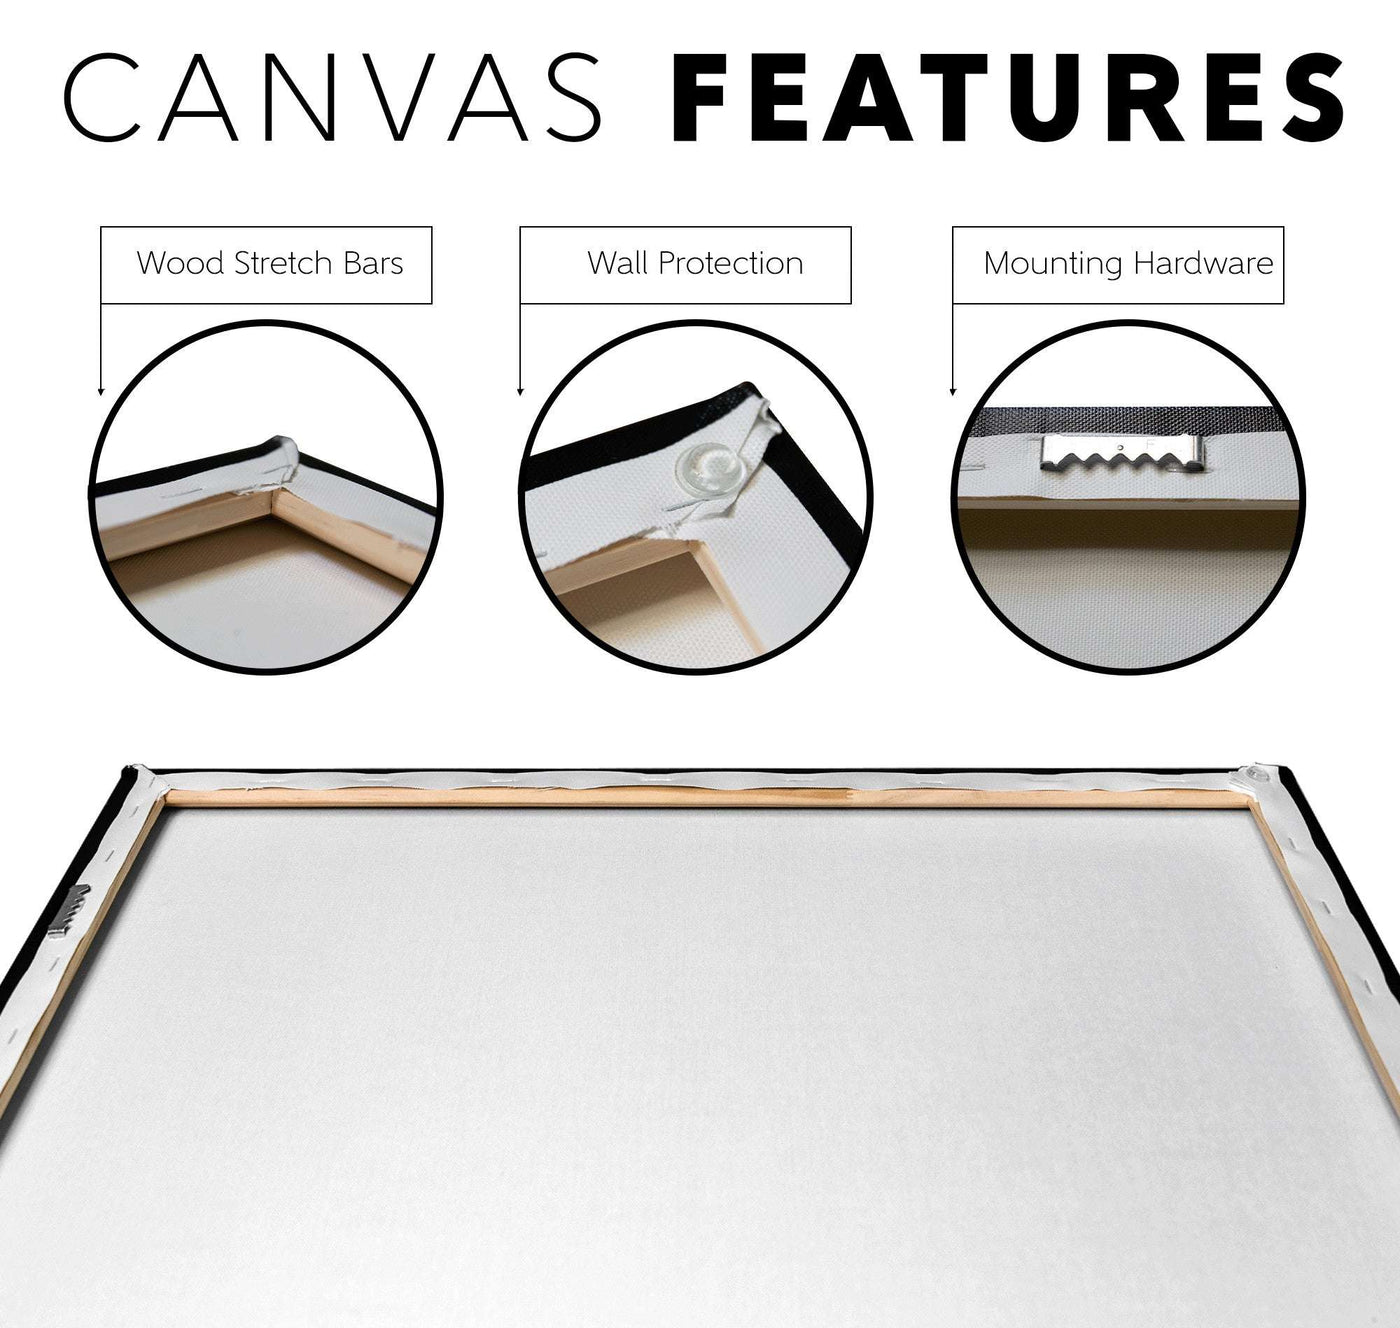 An infographic depicting features of a Canvas Art Print, including wood stretch bars, wall protection, and mounting hardware, with close-up images and labels.